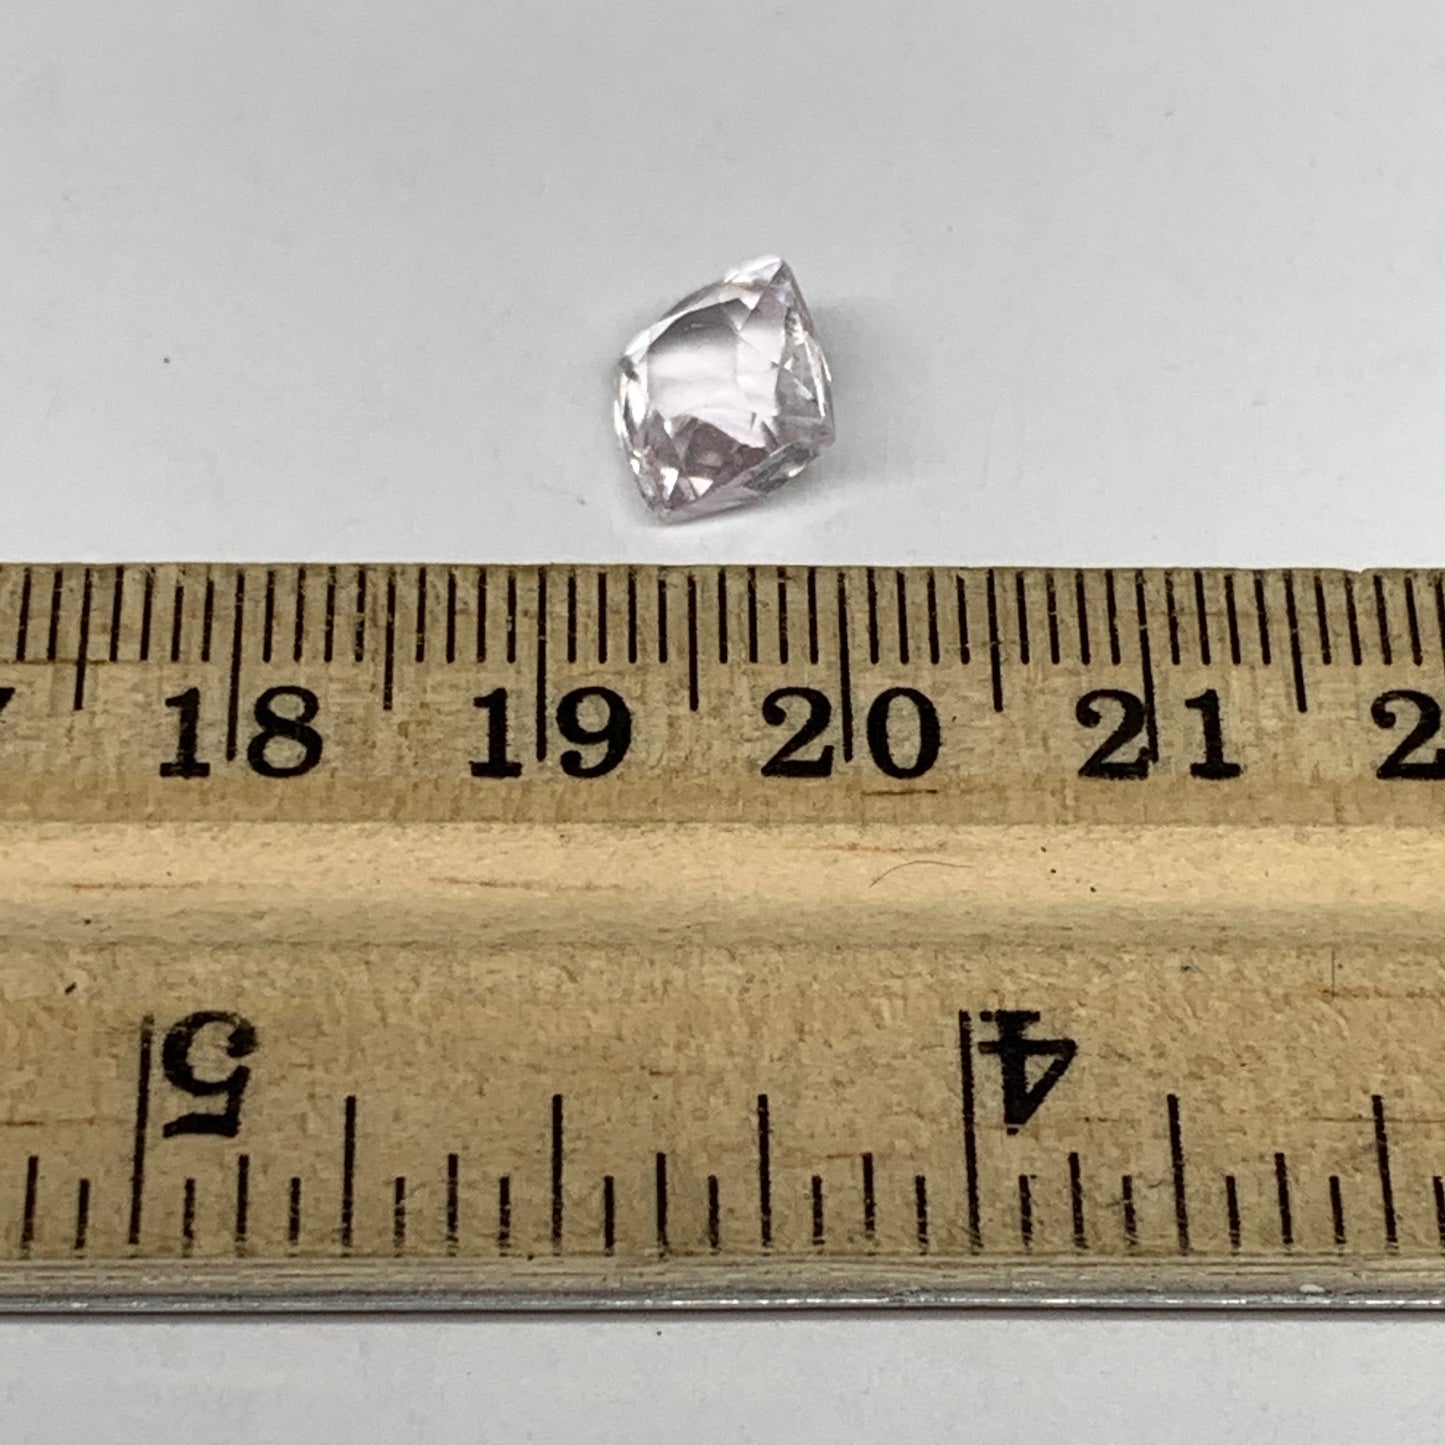 3.39cts, 8mmx8mmx6mm, Kunzite Crystal Facetted Cut Stone @Afghanistan, CTS09